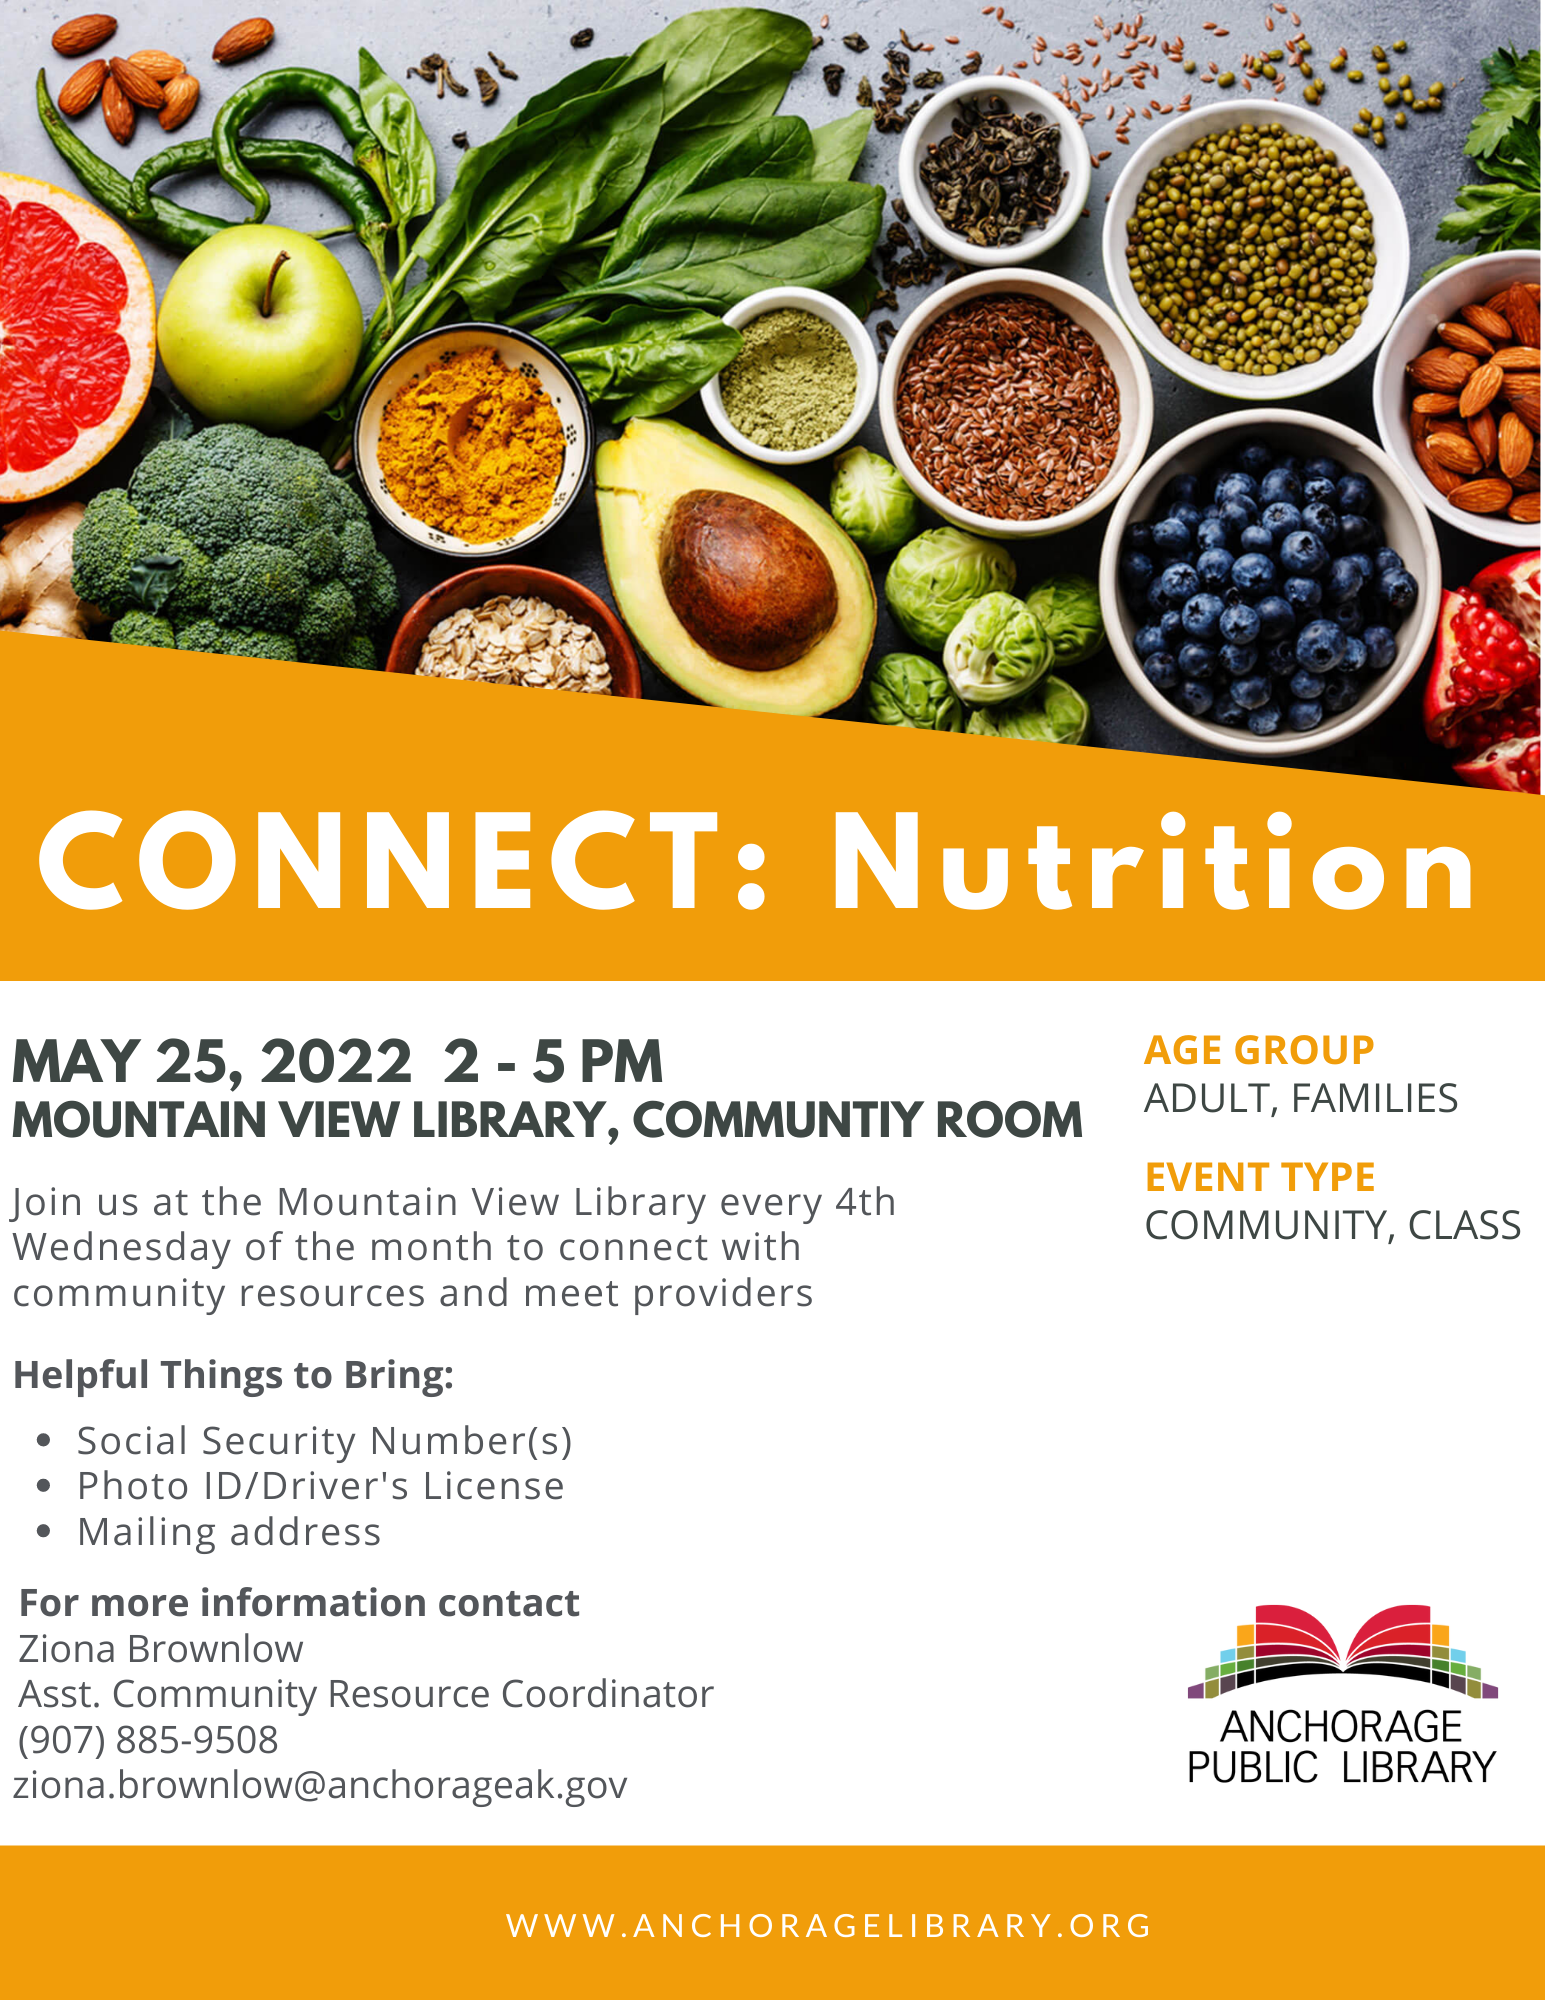 CONNECT: Nutrition